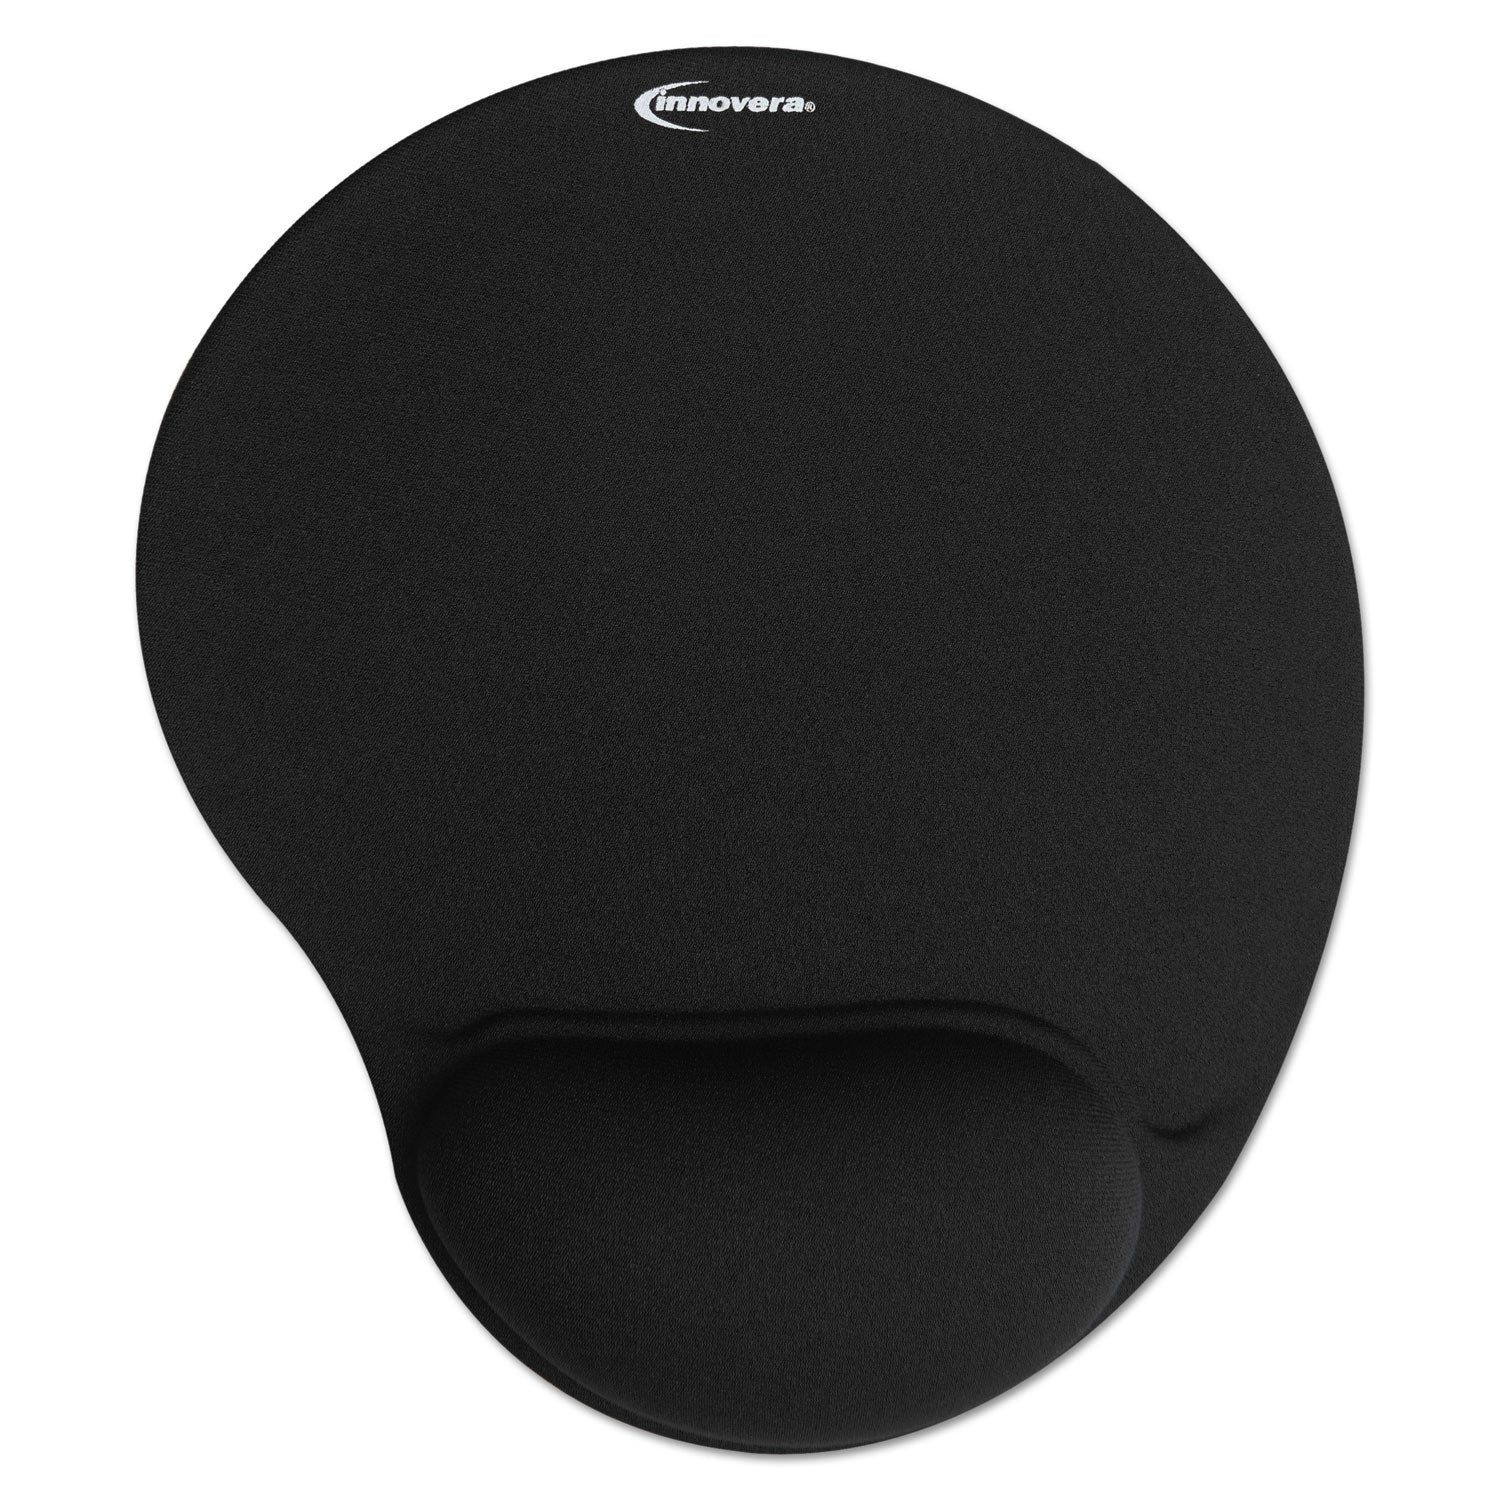 Mouse Pad with Fabric-Covered Gel Wrist Rest, 10.37 x 8.87, Black - 